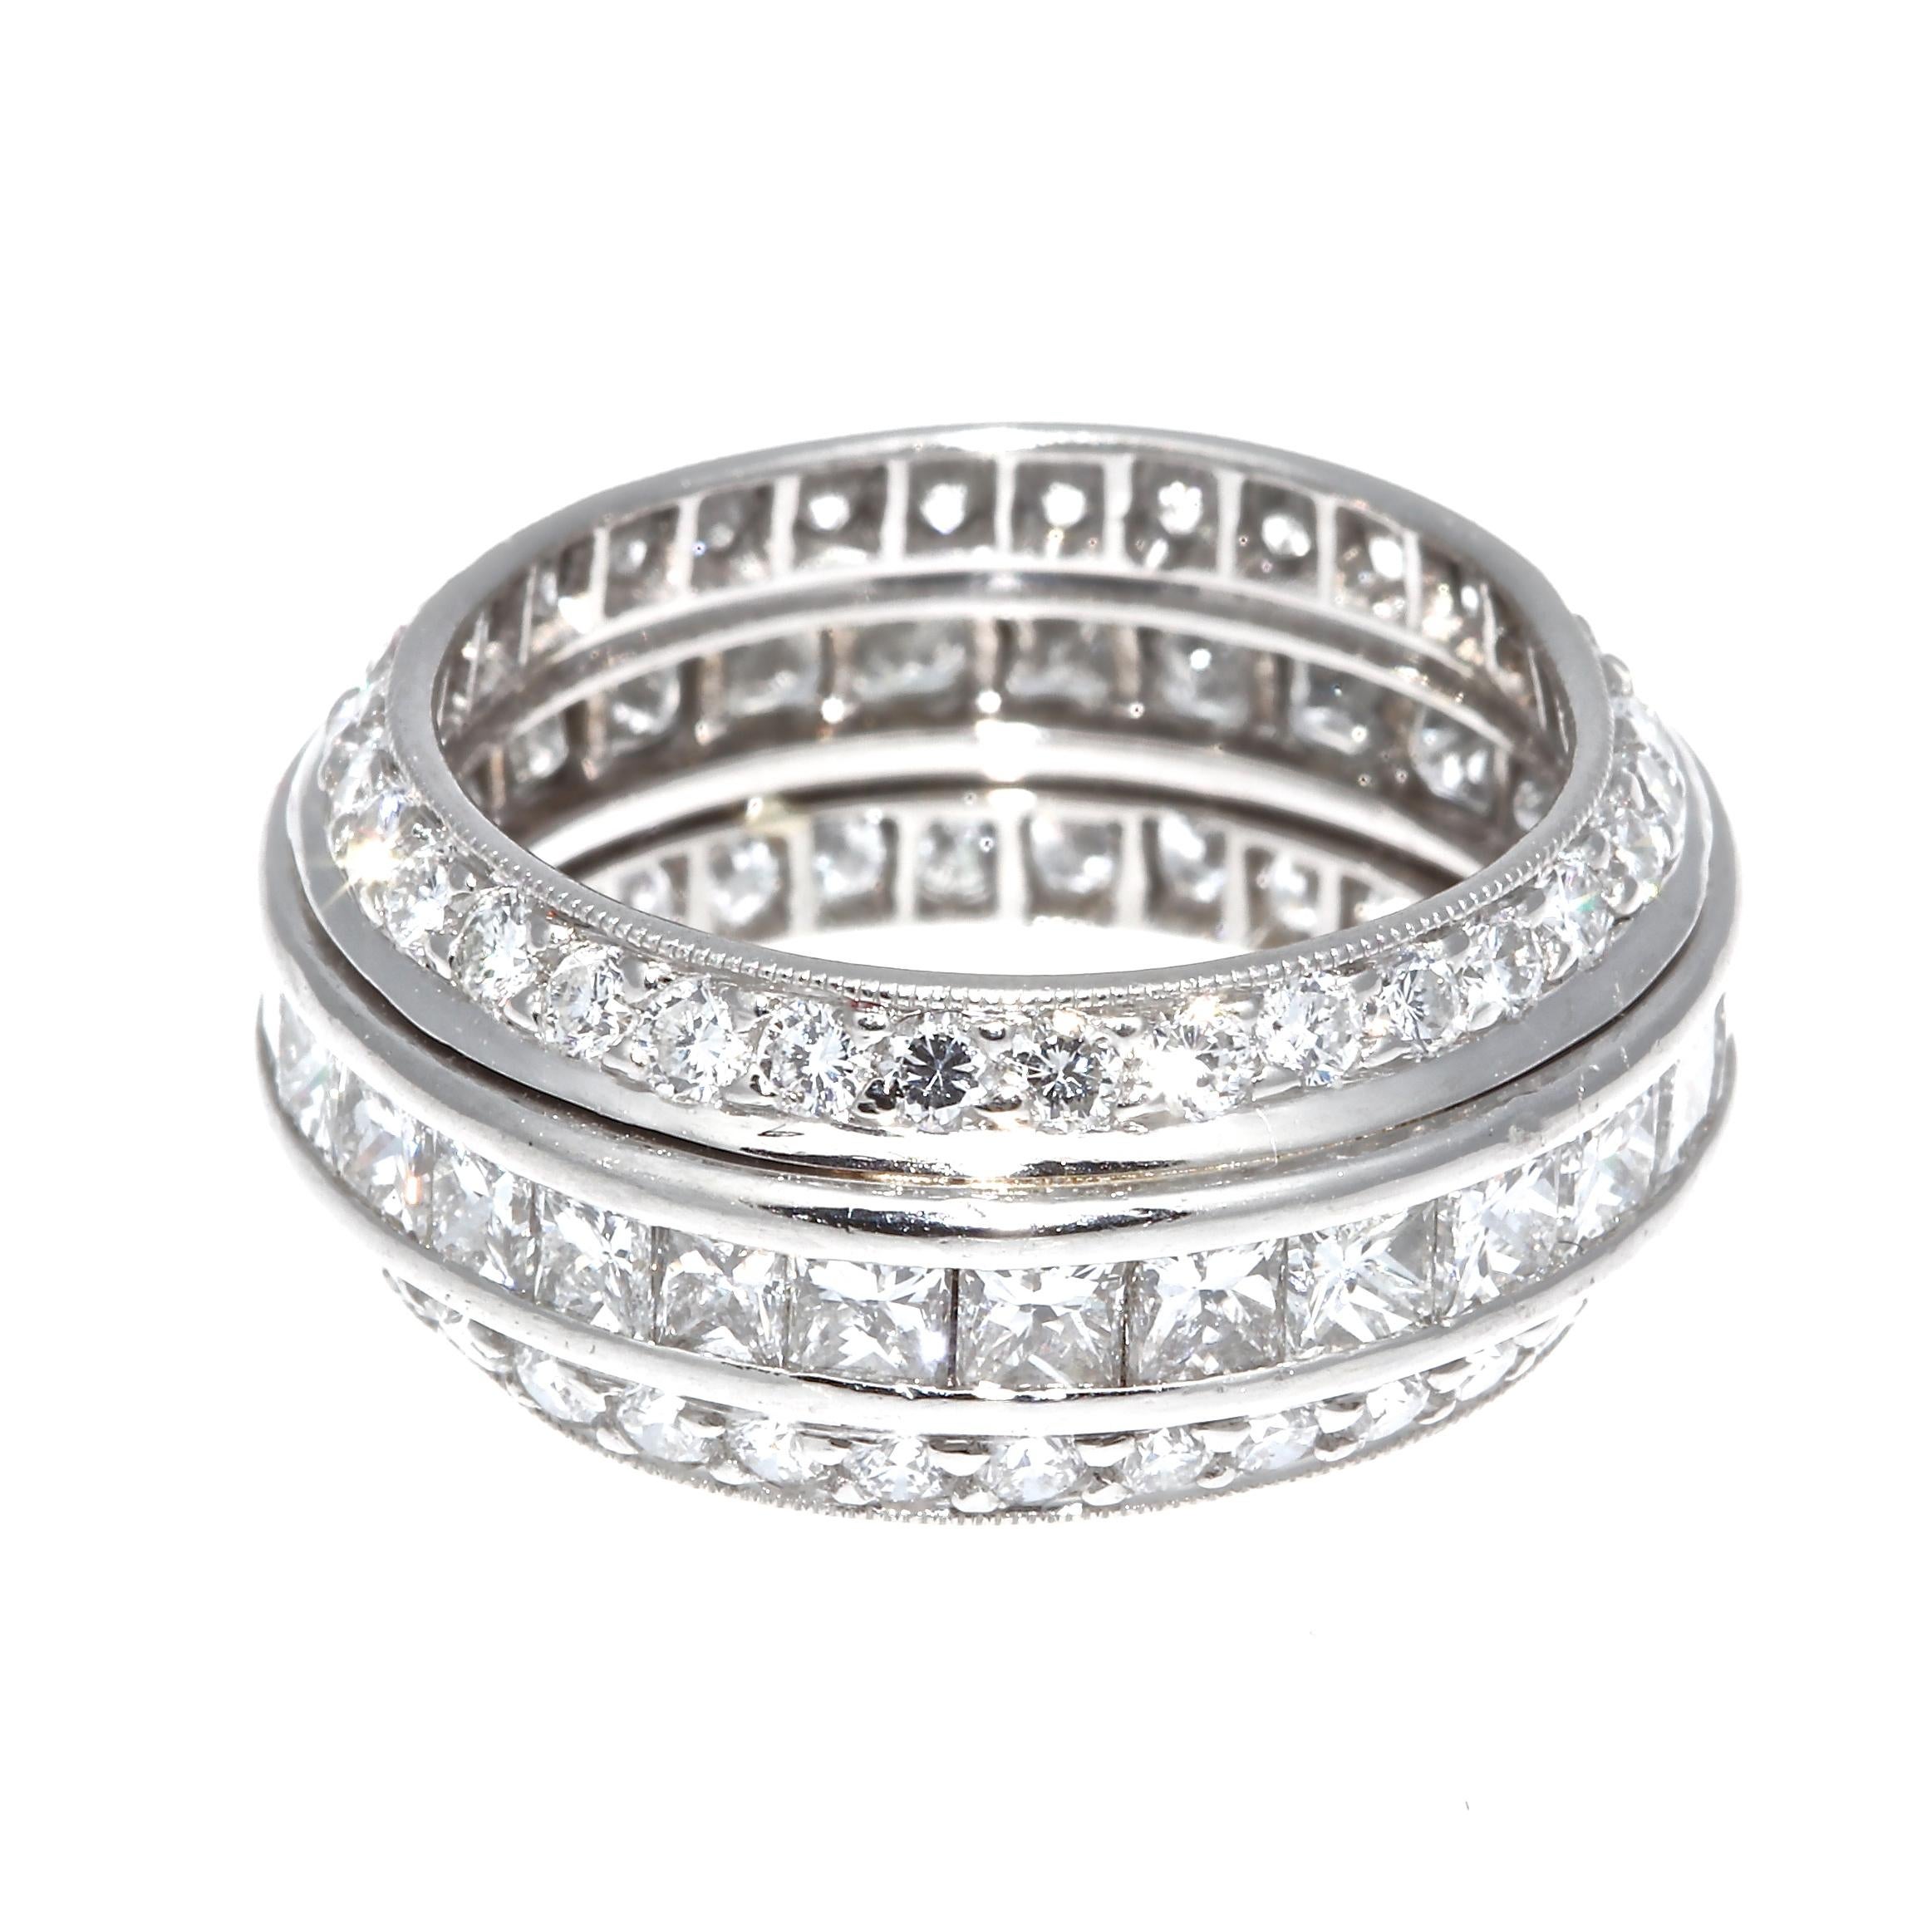 Timeless elegance radiates from this diamond platinum eternity band. Featuring a fascinating combination of 29 princess cut diamonds infused with two round cut dimaond bands weighing approximately 3.50 carats total and are H-I color, VS+ clarity.